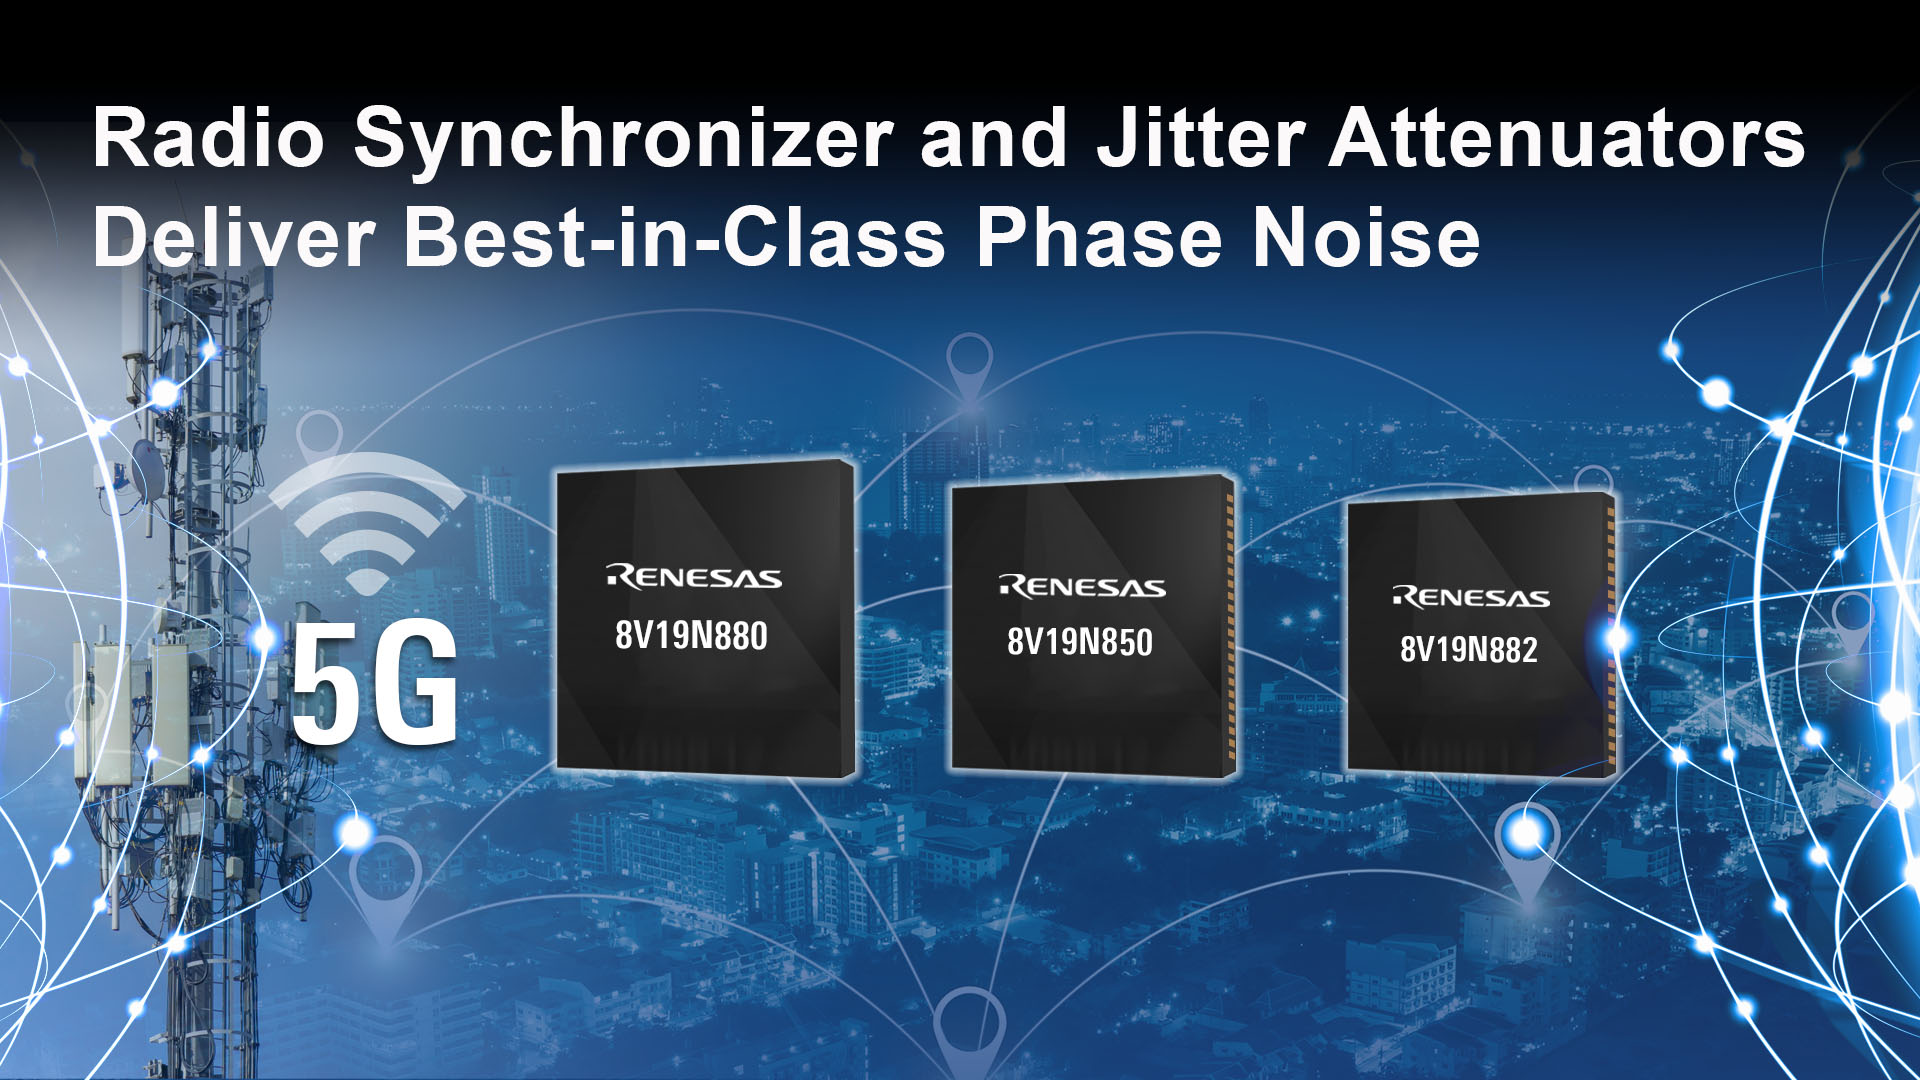 Radio Synchronizer and Jitter Attenuators Deliver Best-in-Class Phase Noise 